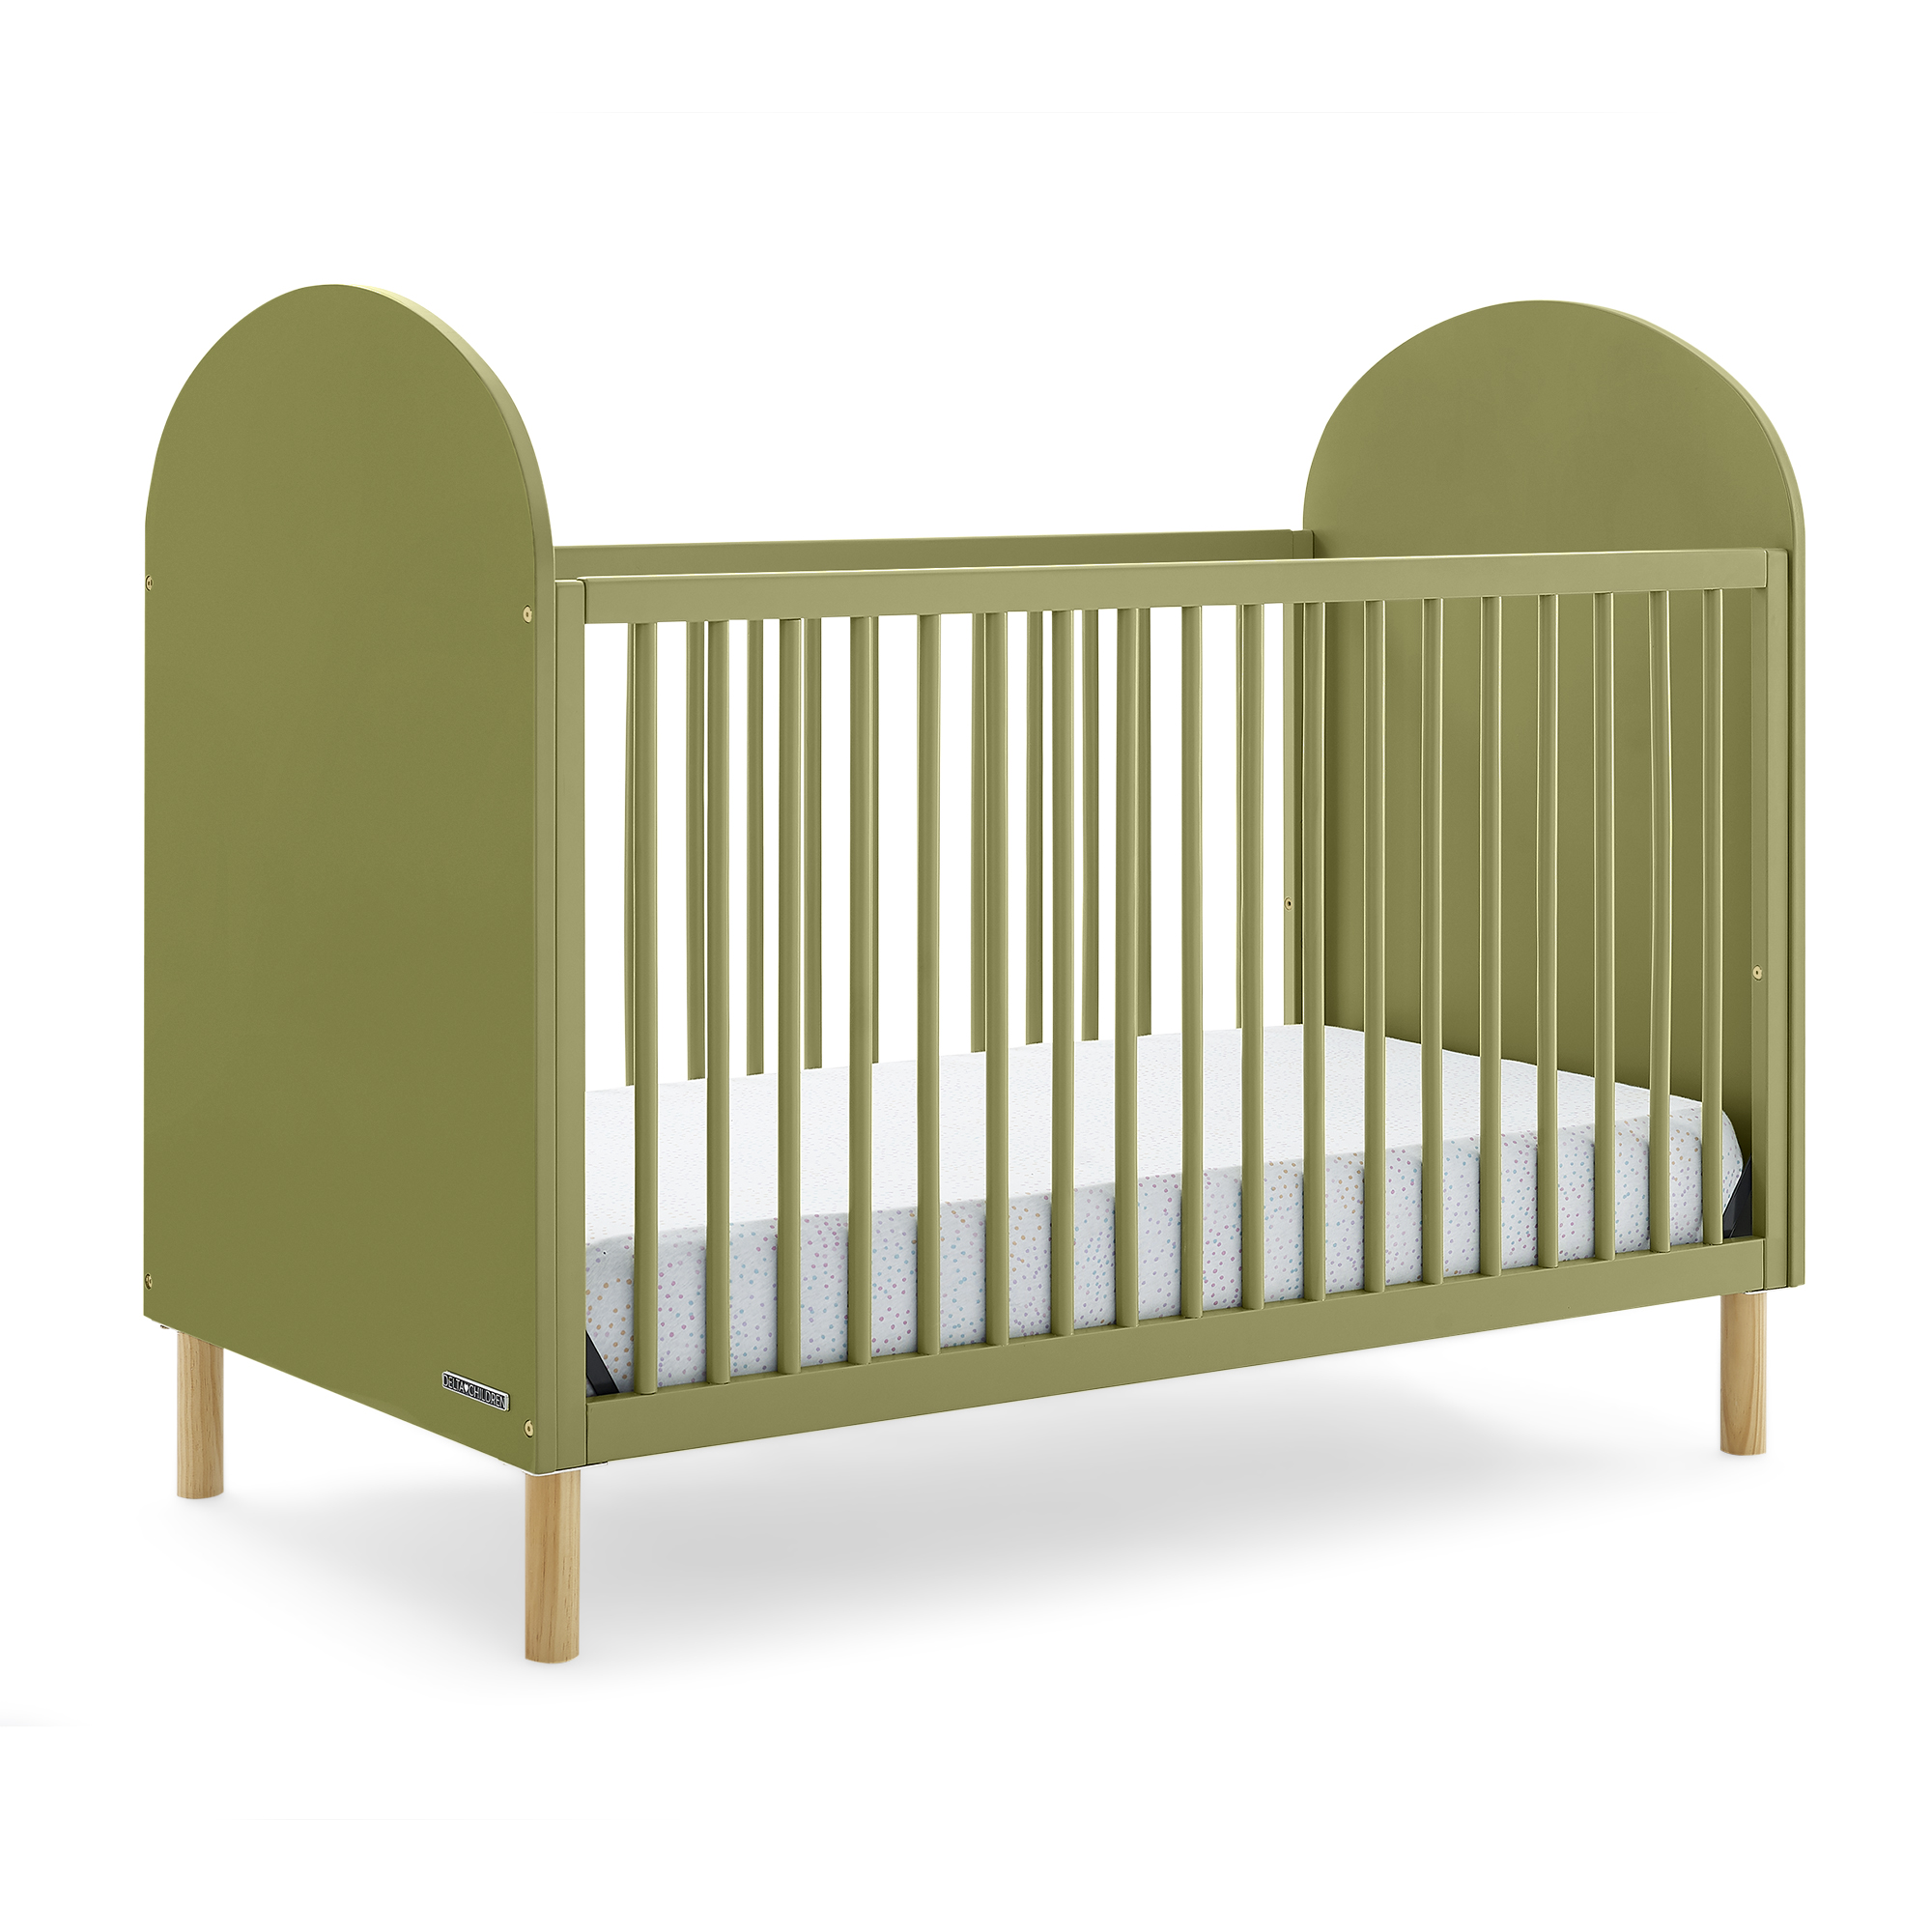 Delta Children Reese 4-in-1 Convertible Crib - Greenguard Gold Certified, Olive Green/Natural - image 1 of 17